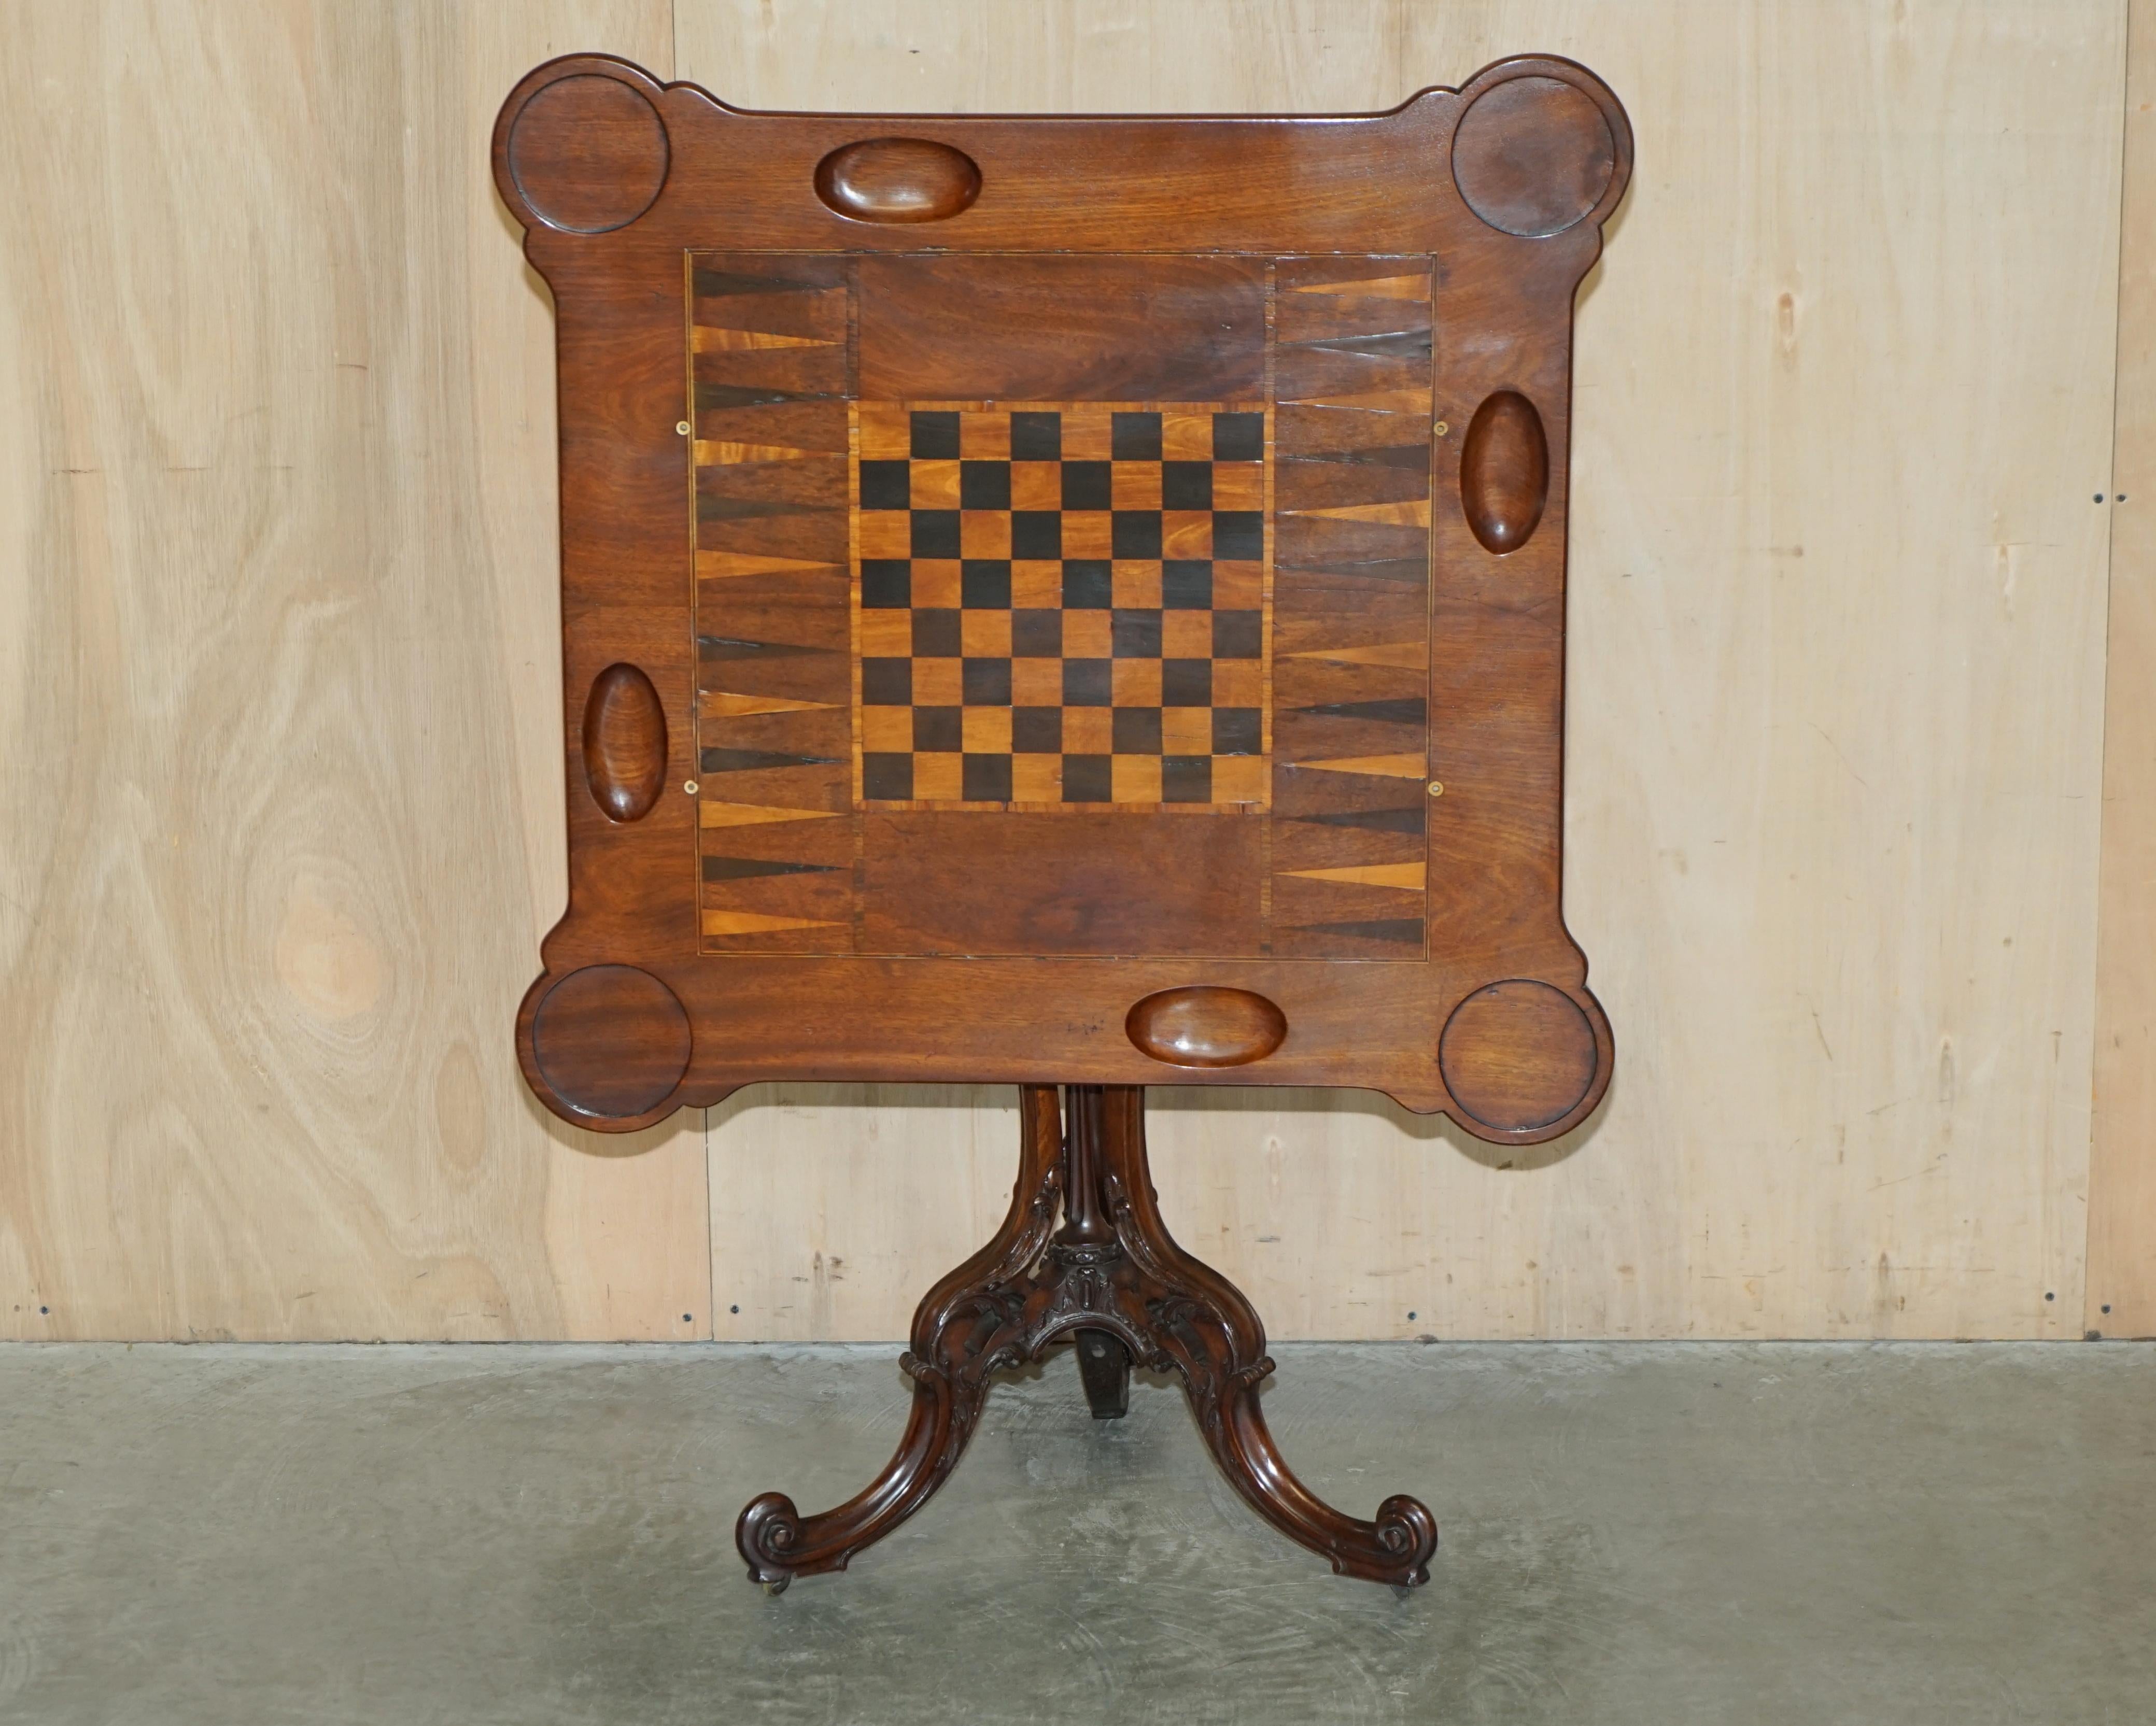 We are delighted to offer for sale this original, fully restored, Victorian circa 1860-1880 Burr Walnut, tilt top Chessboard games table with beautifully crafted base and marquetry inlaid top

A very good looking and well made table, it can be